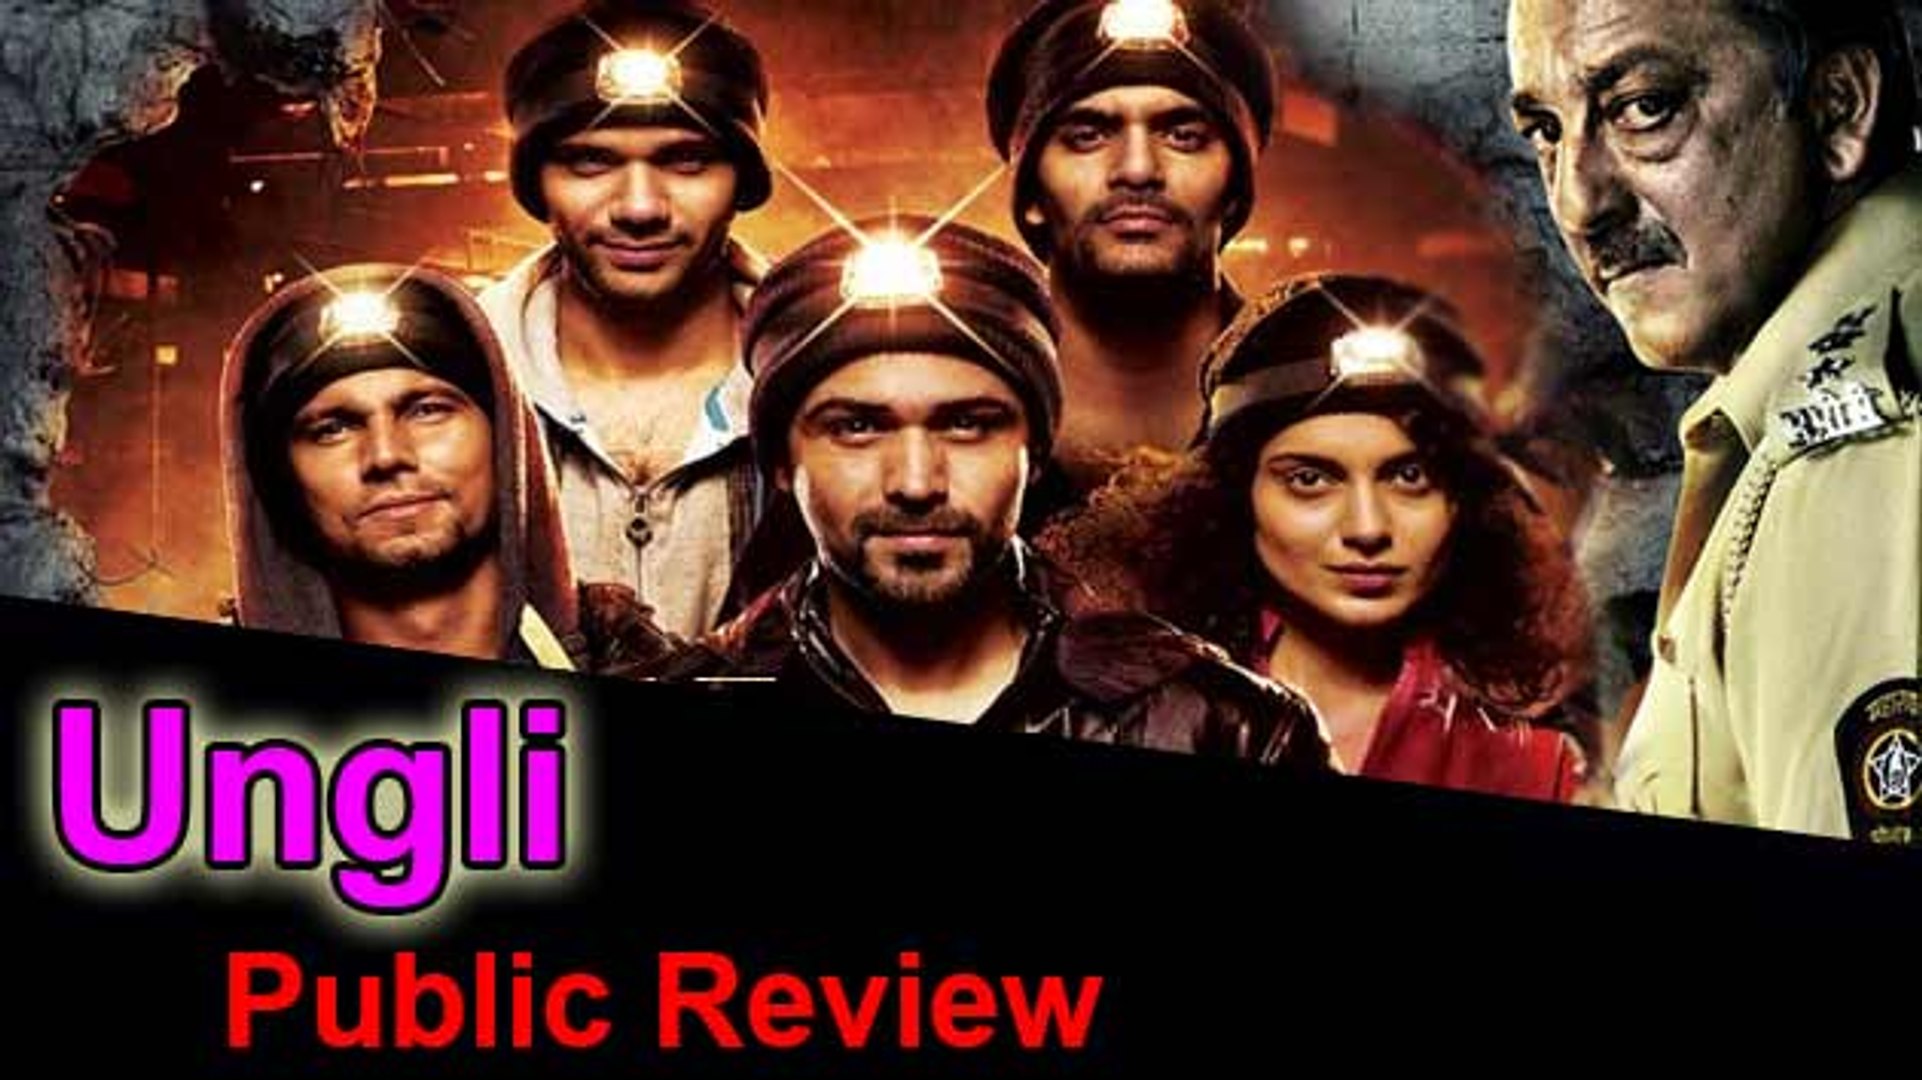 billy laurent recommends ungli movie full movie pic